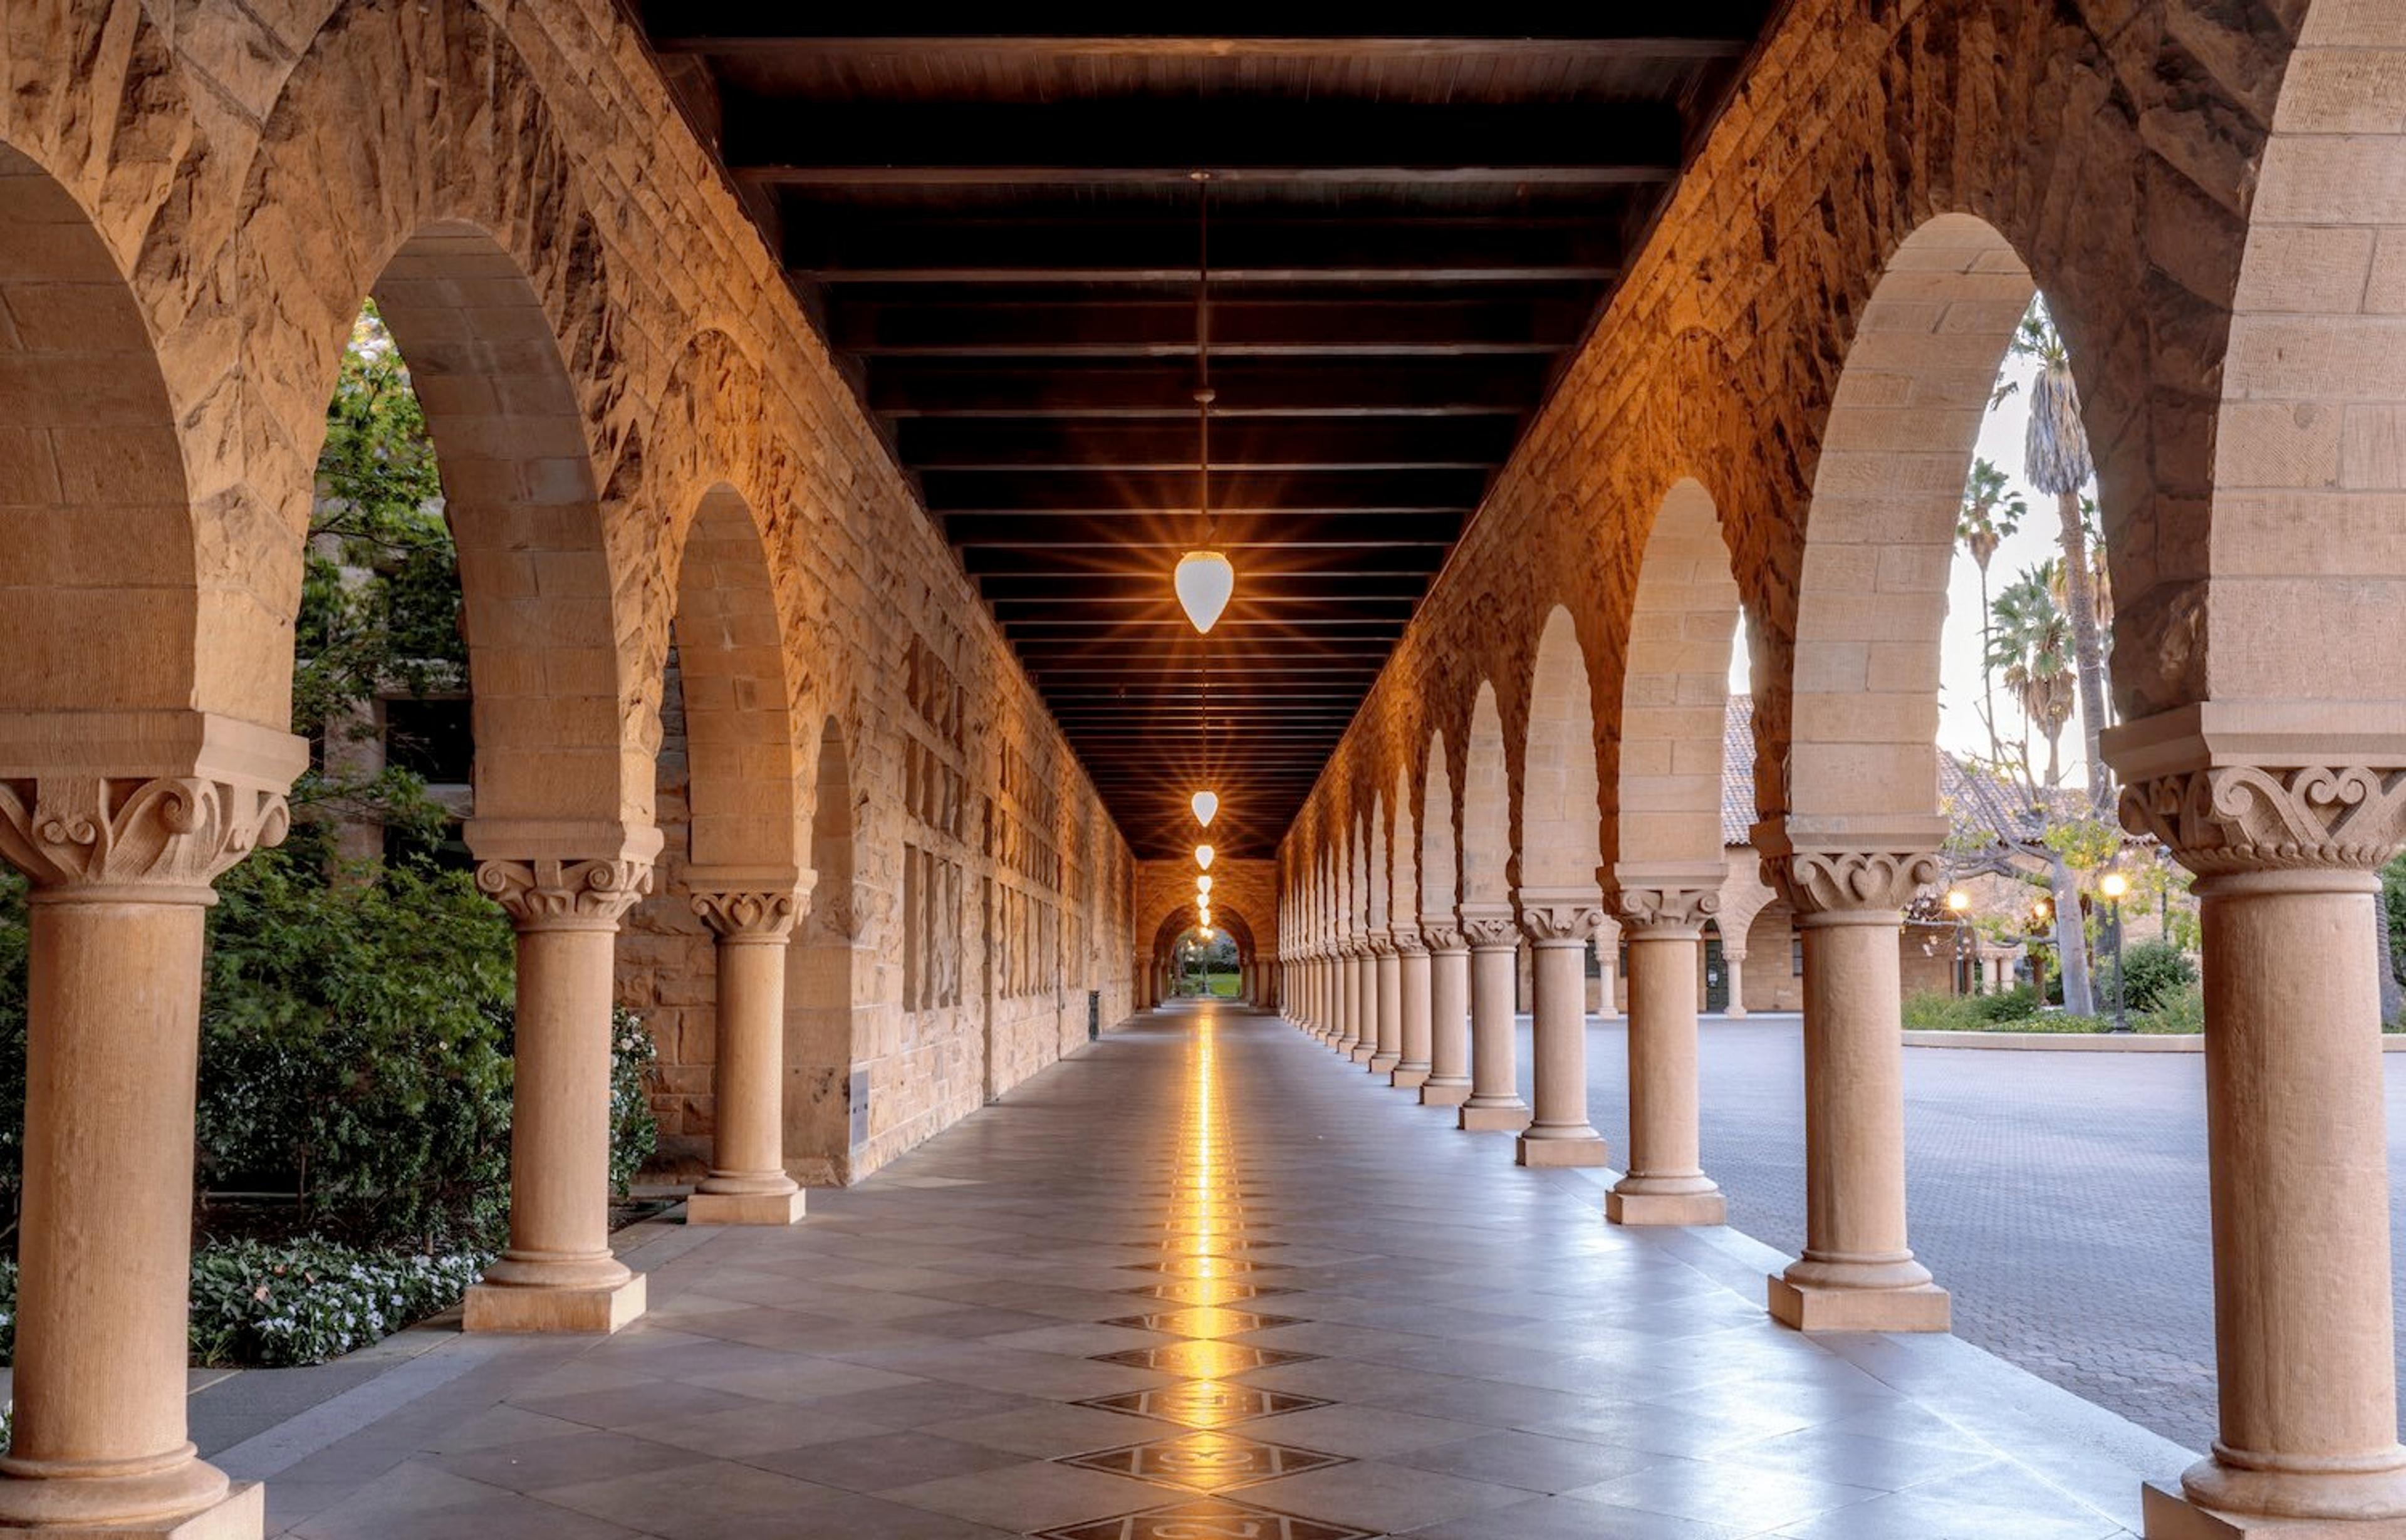 stanford essay what matters to you and why